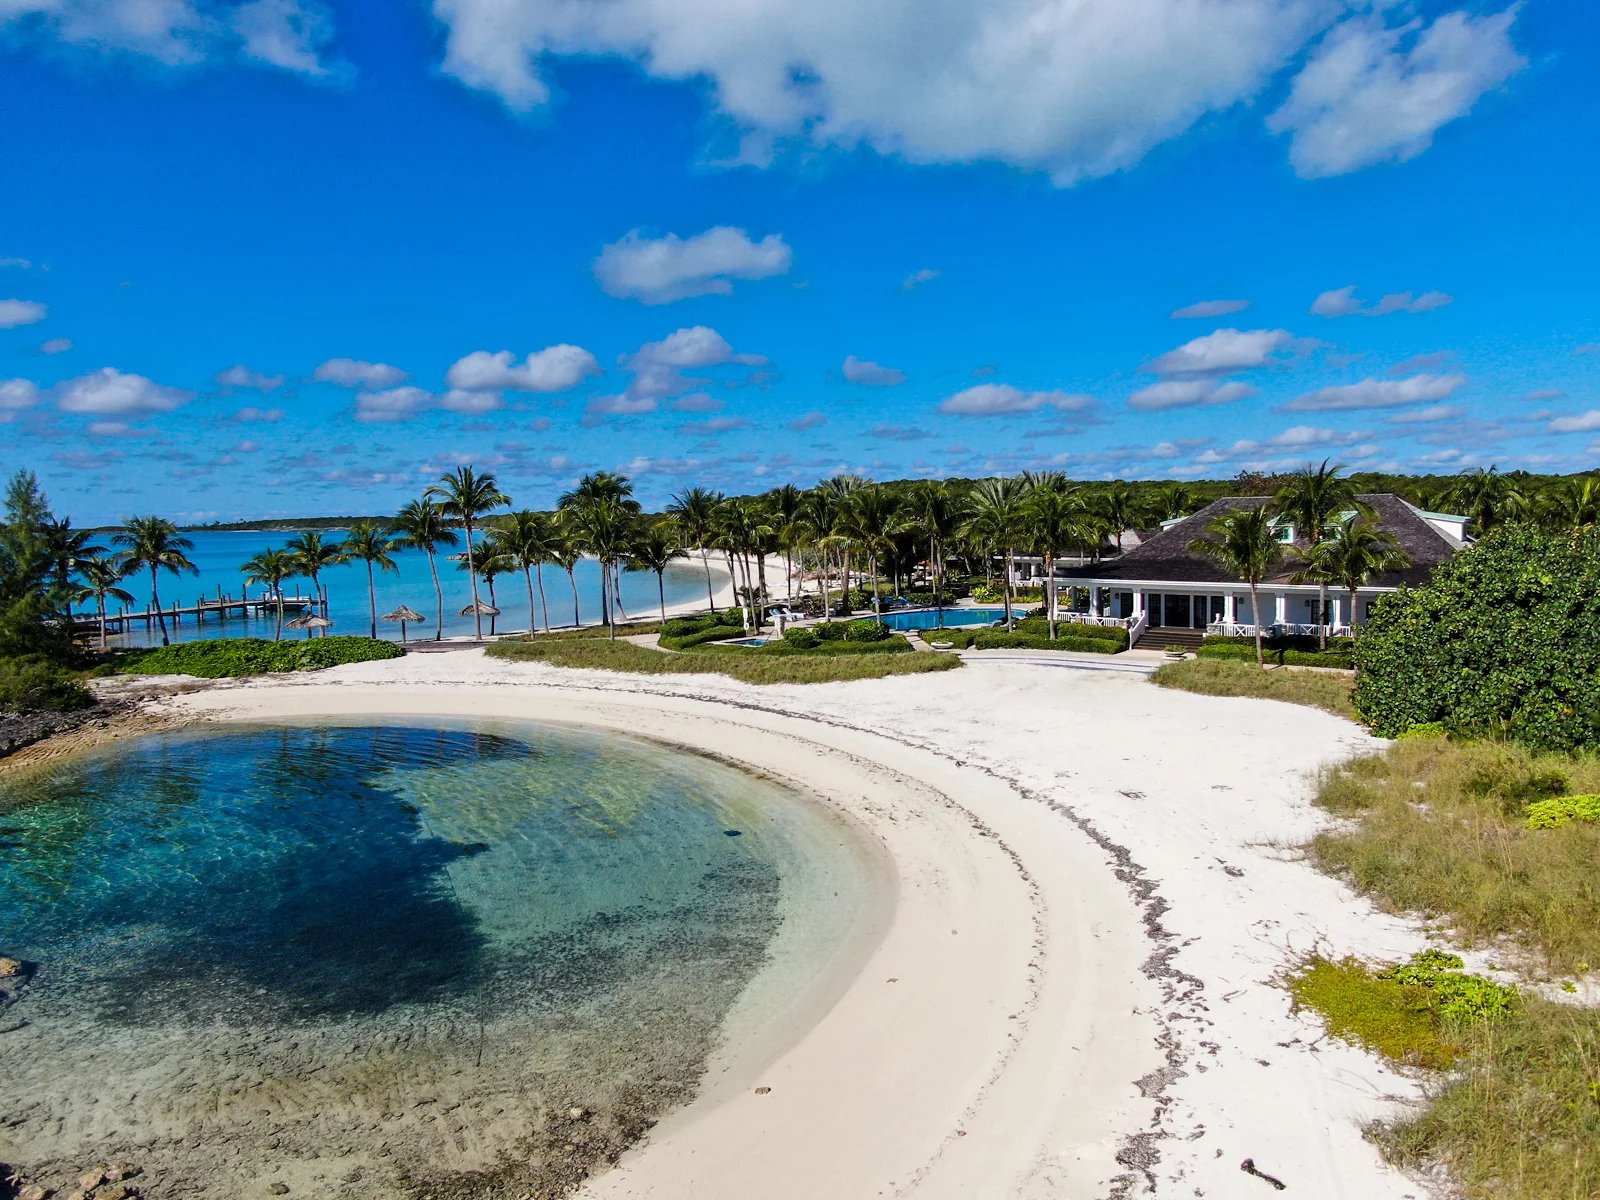 royal island, the perfect private island opportunity - mls 51444 image34